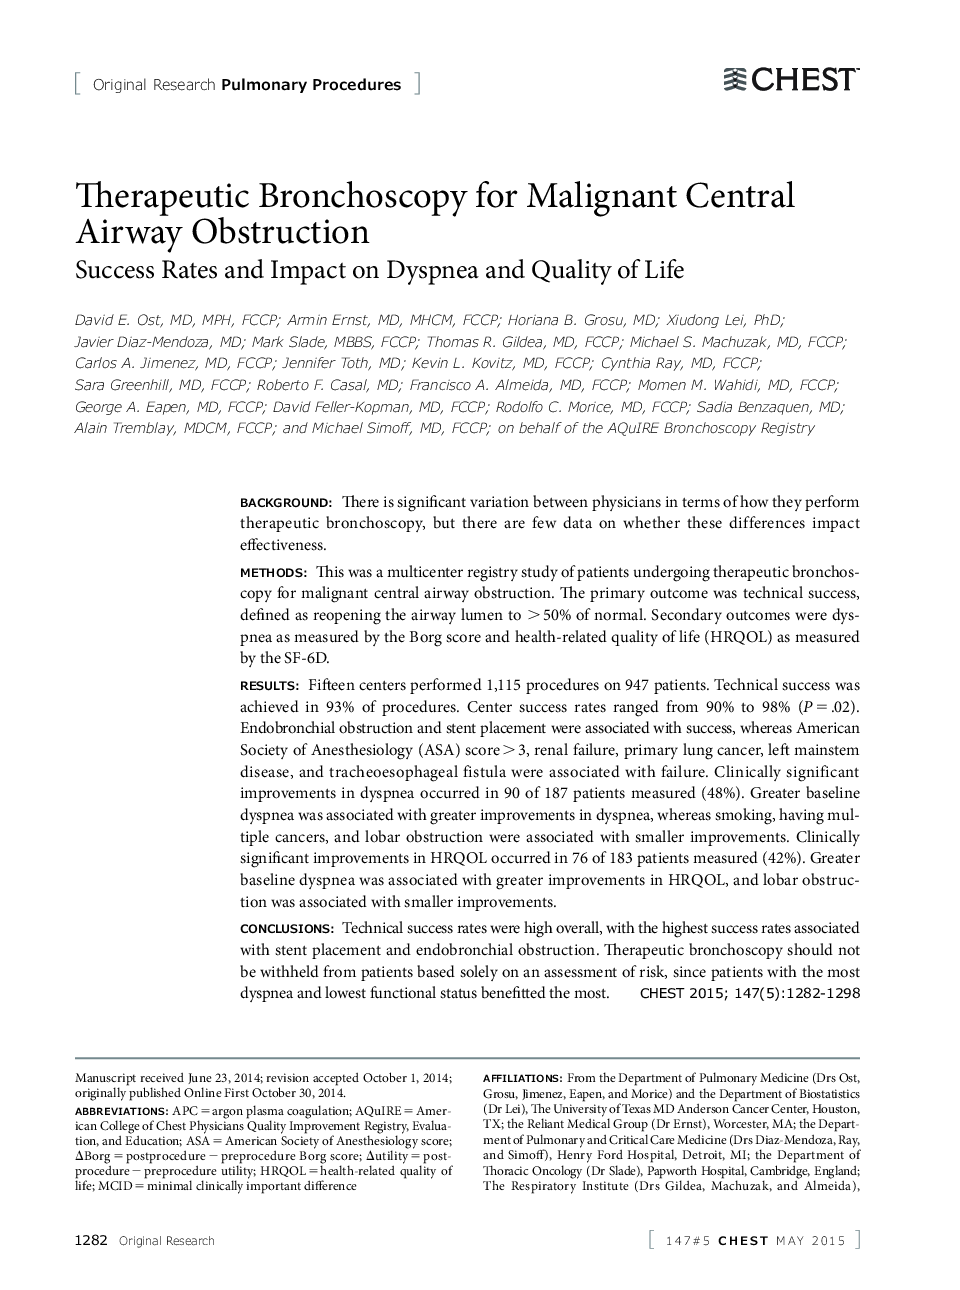 Original Research: Pulmonary ProceduresTherapeutic Bronchoscopy for Malignant Central Airway Obstruction